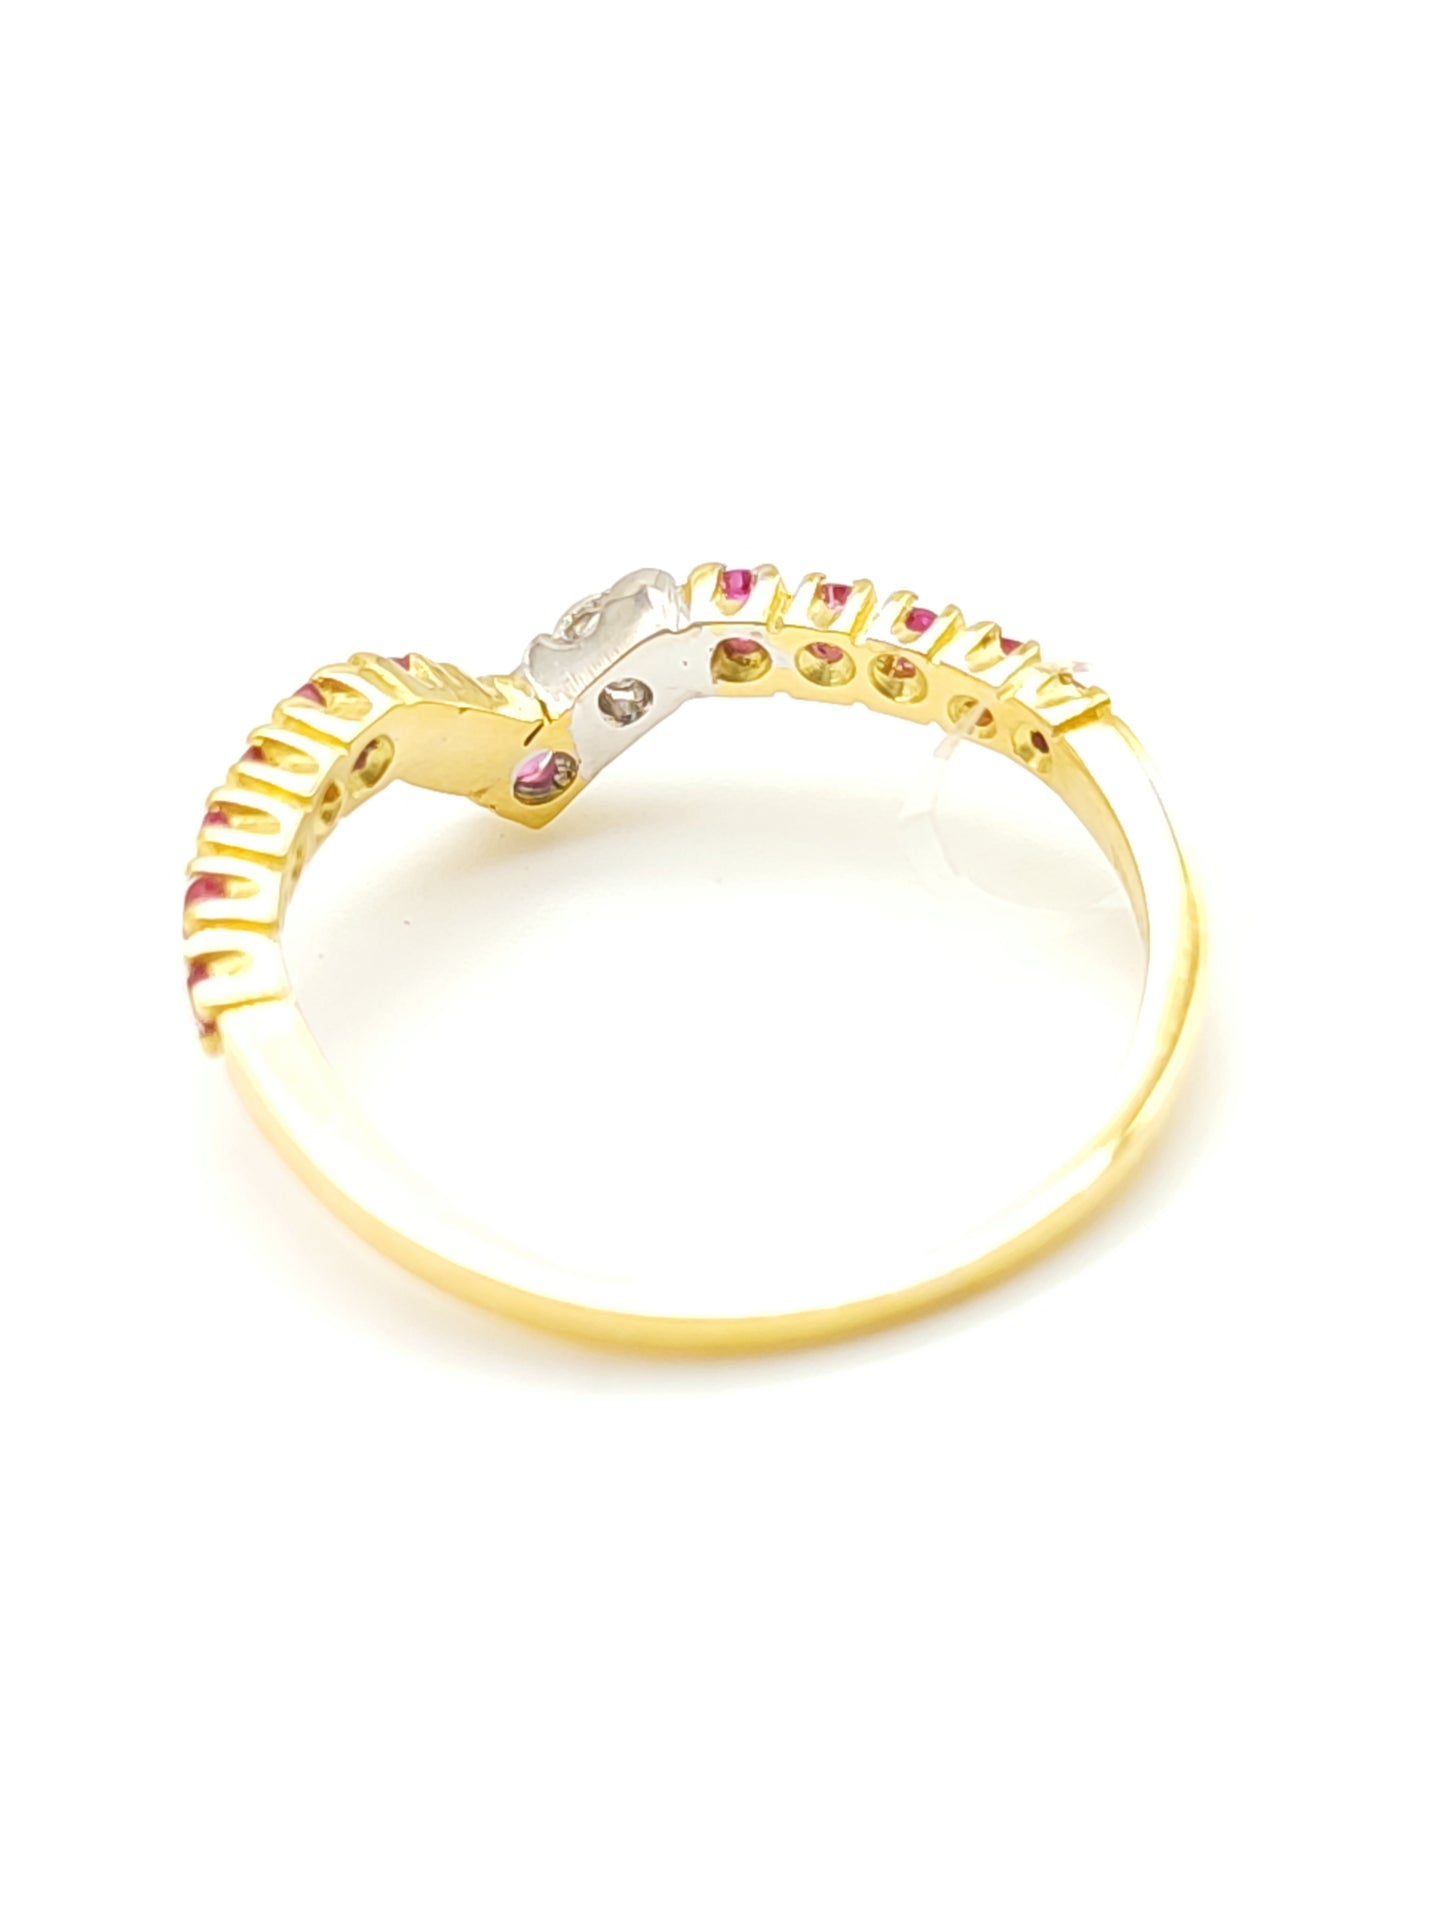 Gold ring with rubies and diamond